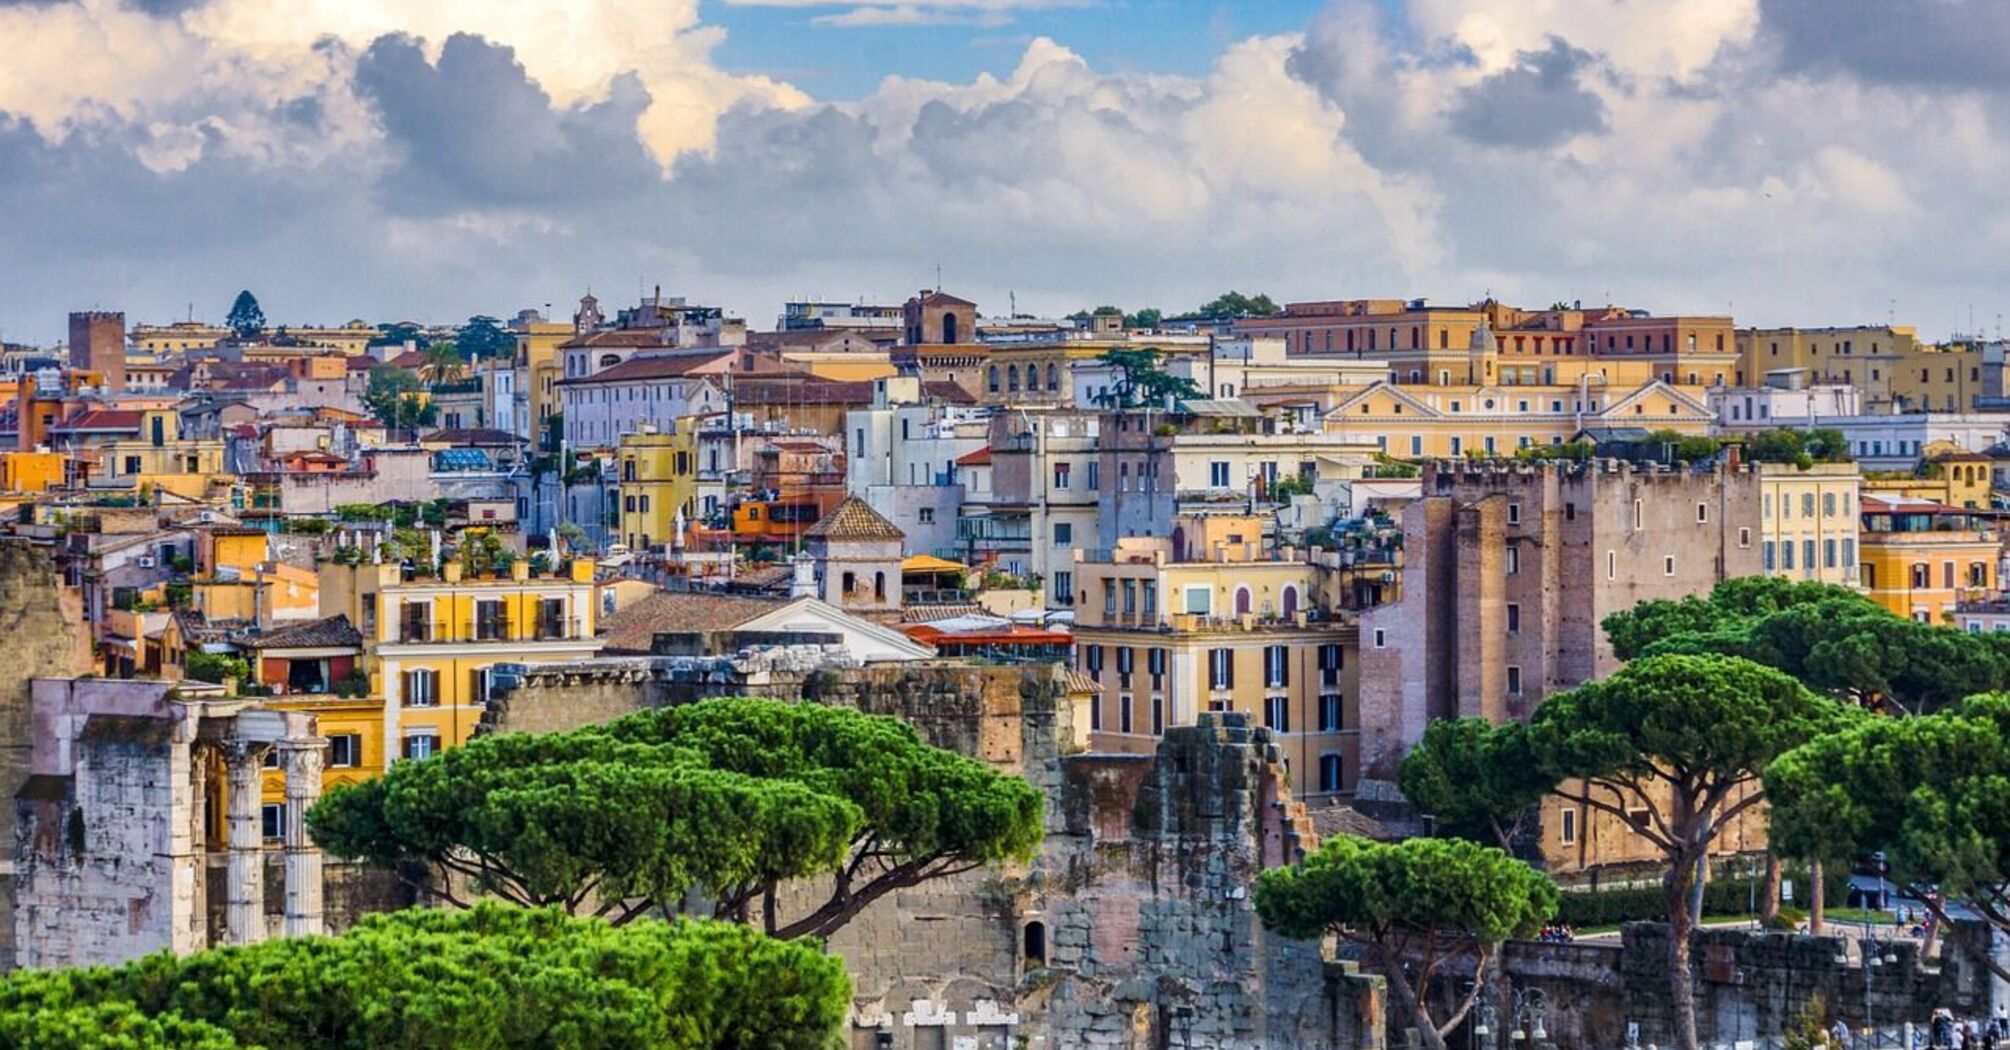 Day trips near Rome: Top 10 travel destinations